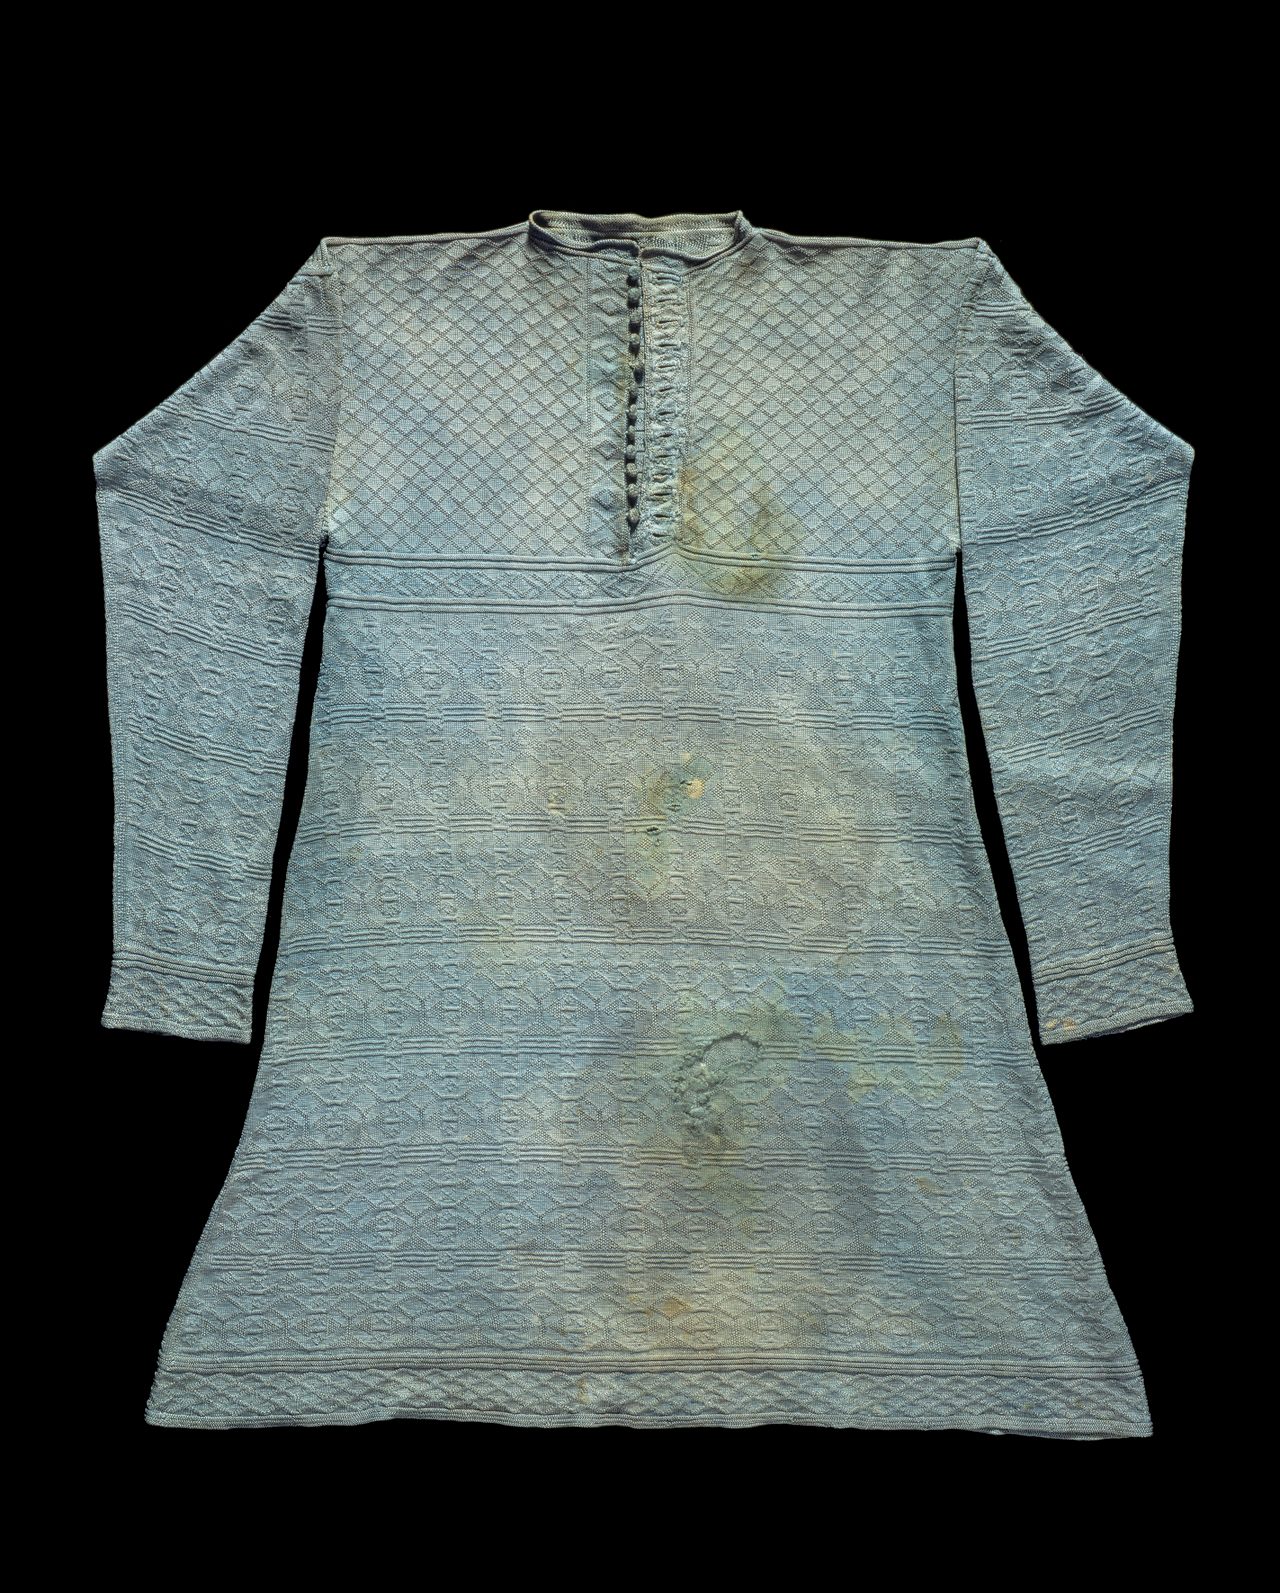 Scientific testing is underway to determine if King Charles I wore this garment at his execution.